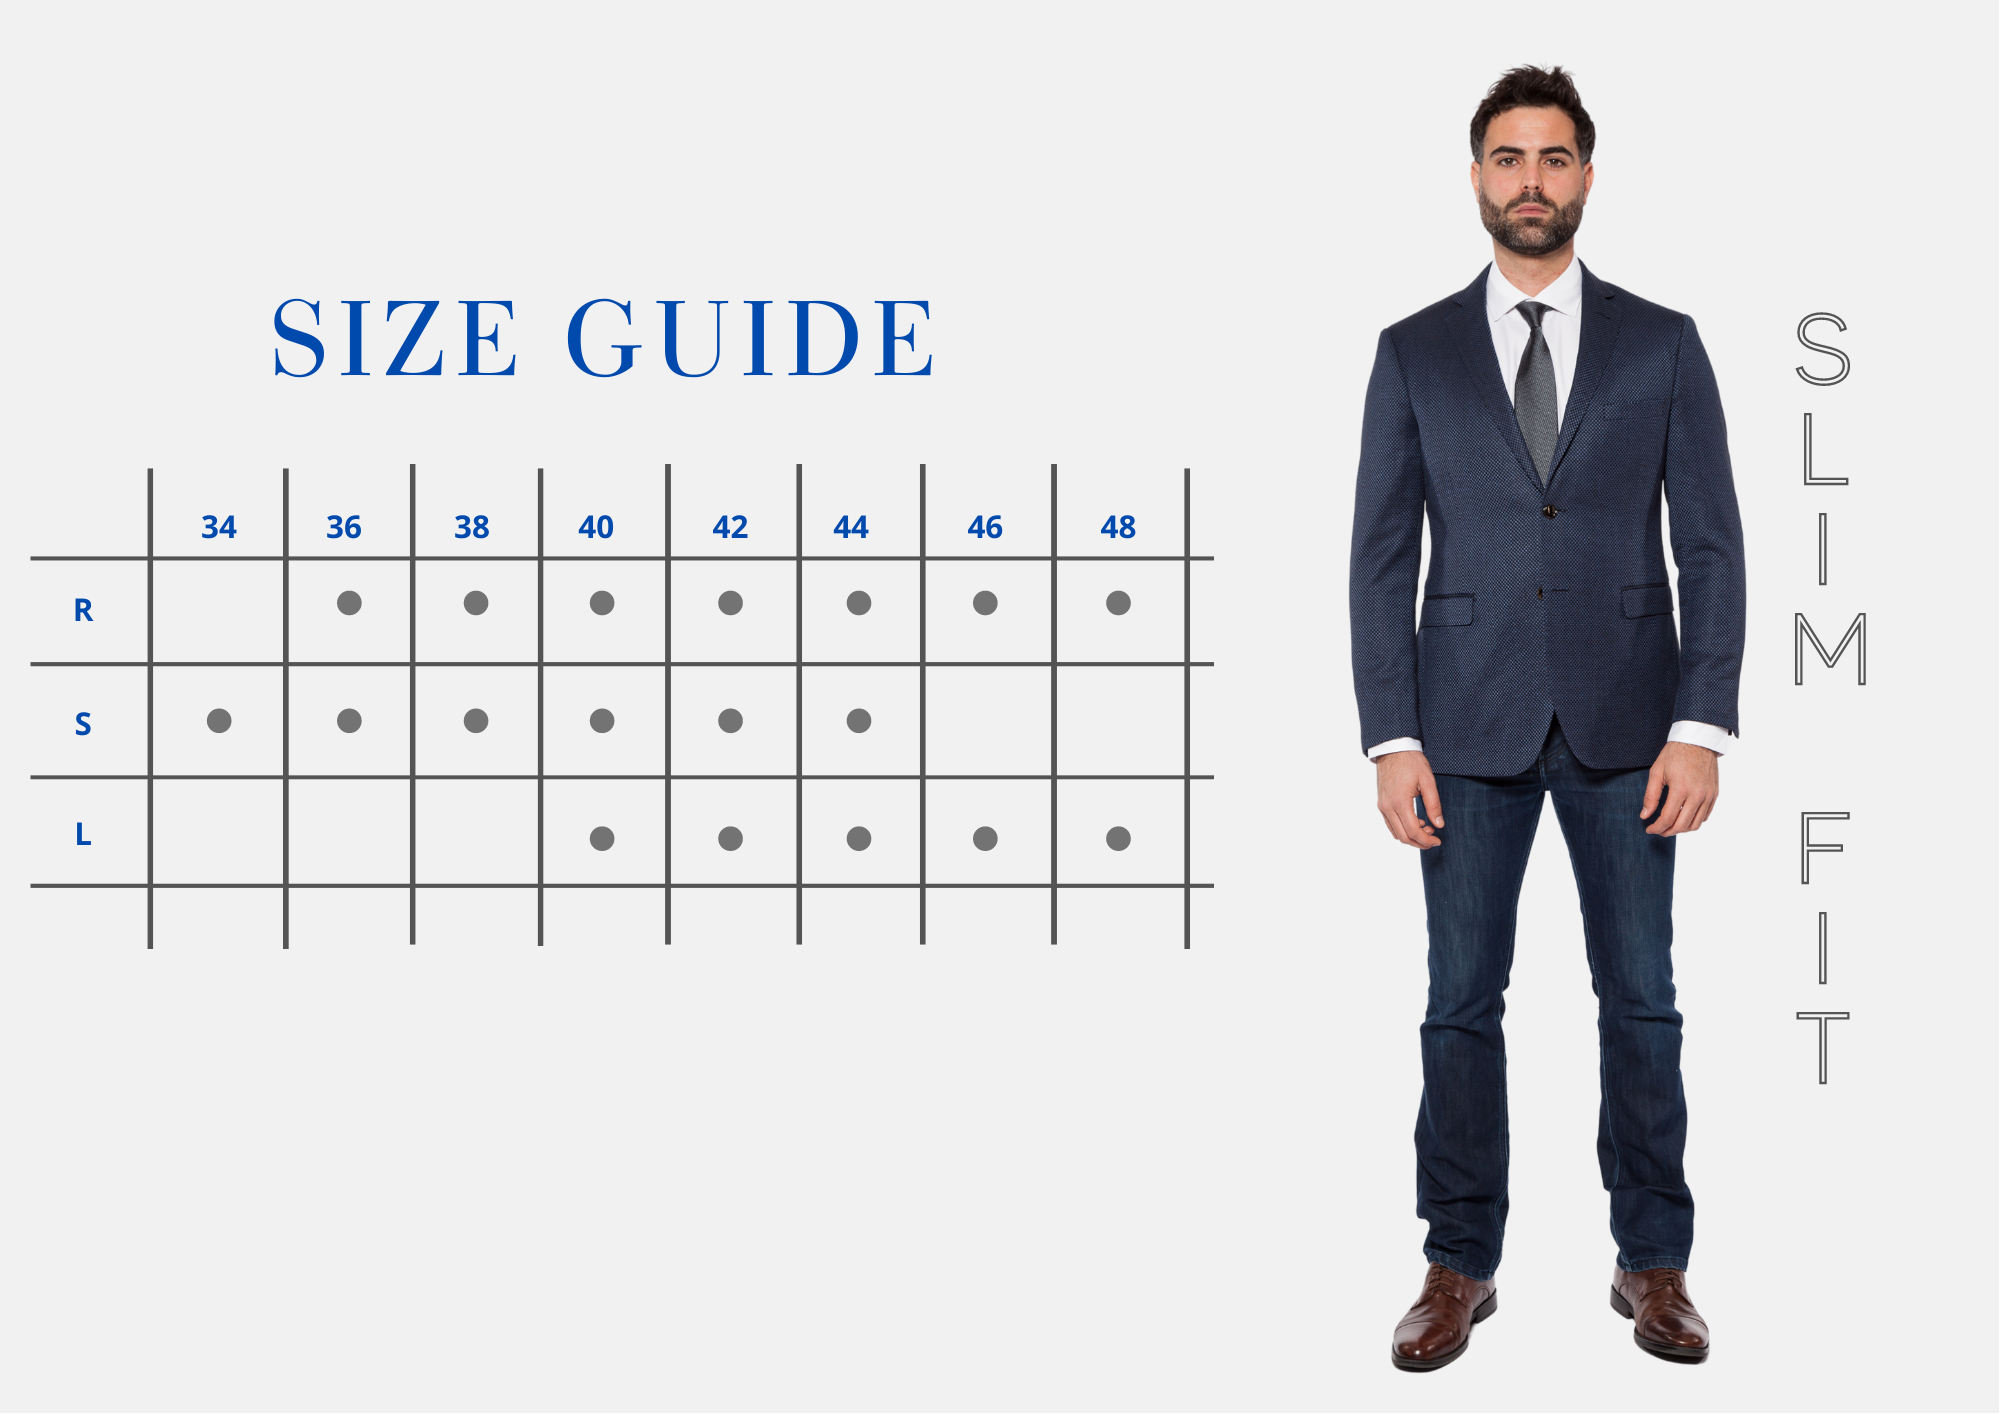 Marina Imports- Size Guide, Slim Fit